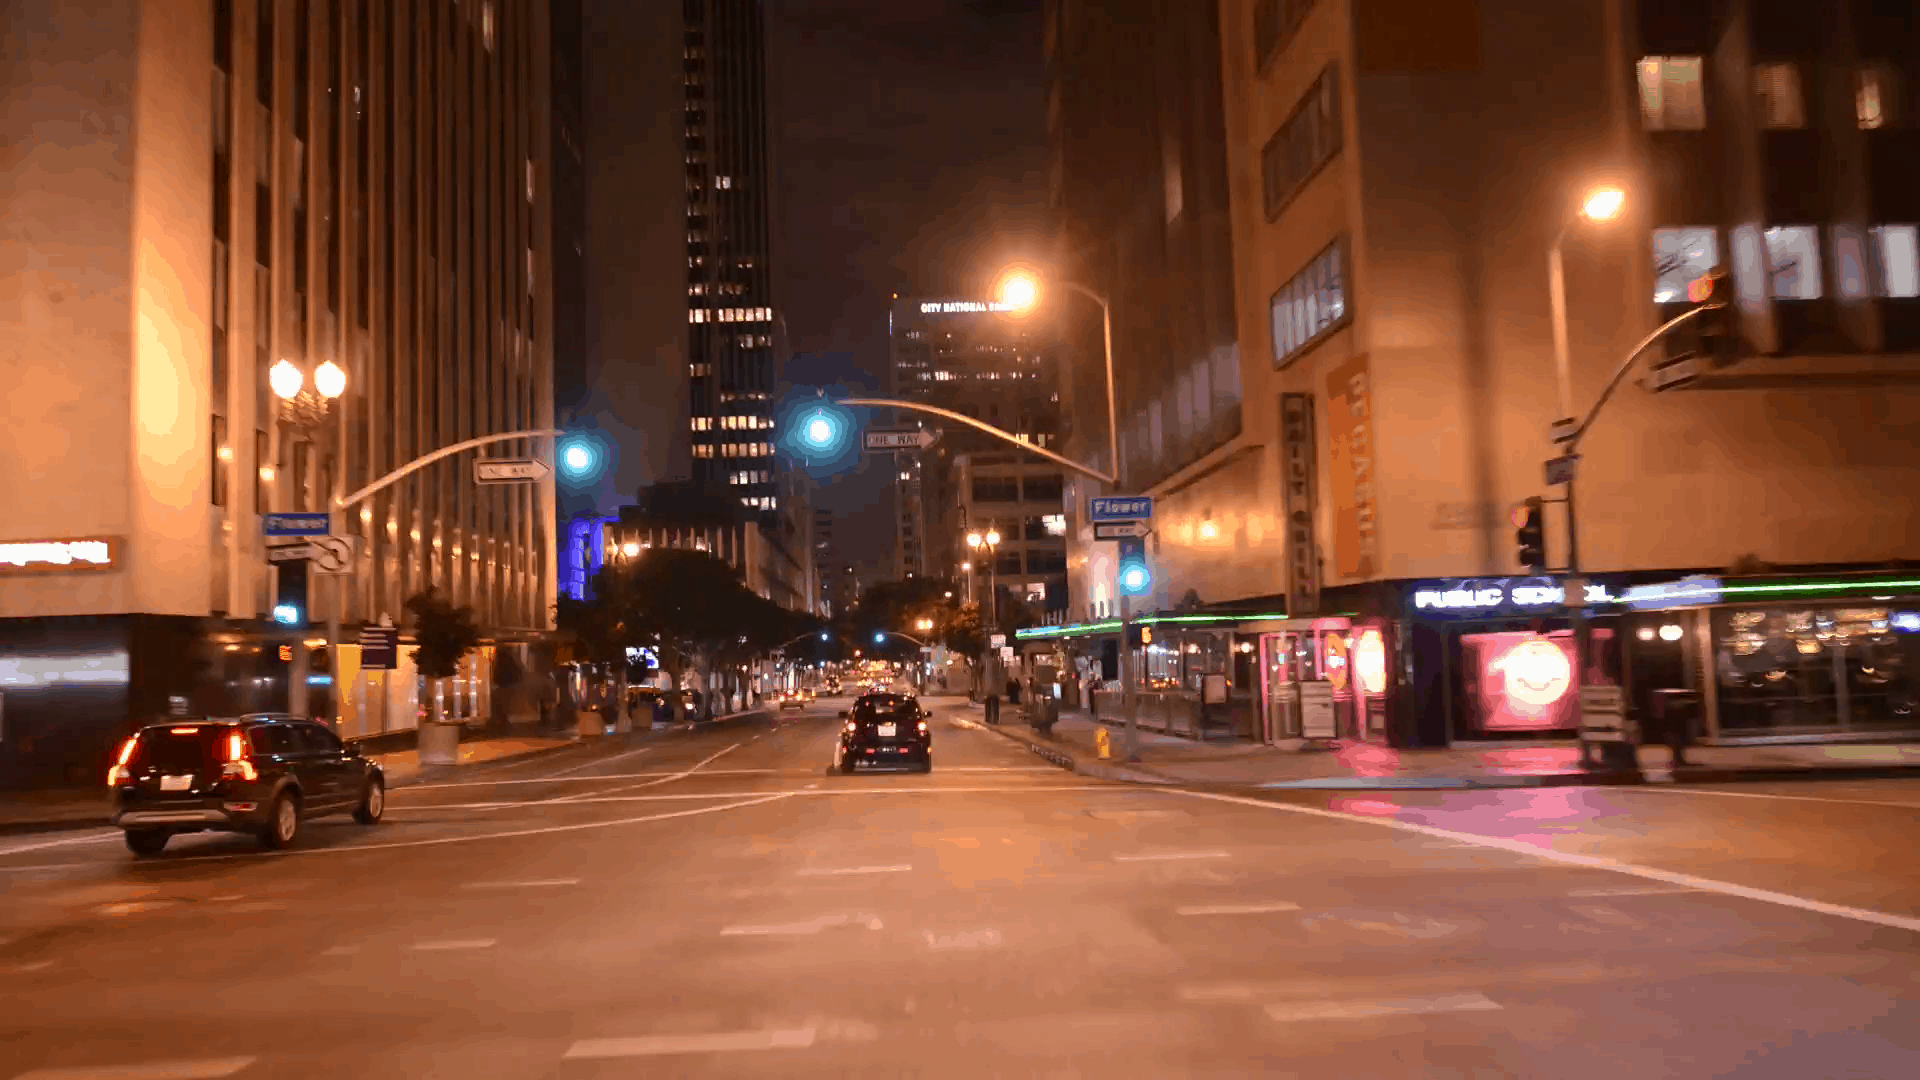 A Quick Guide for Lighting in Filmmaking - An image showing an example of street lighting